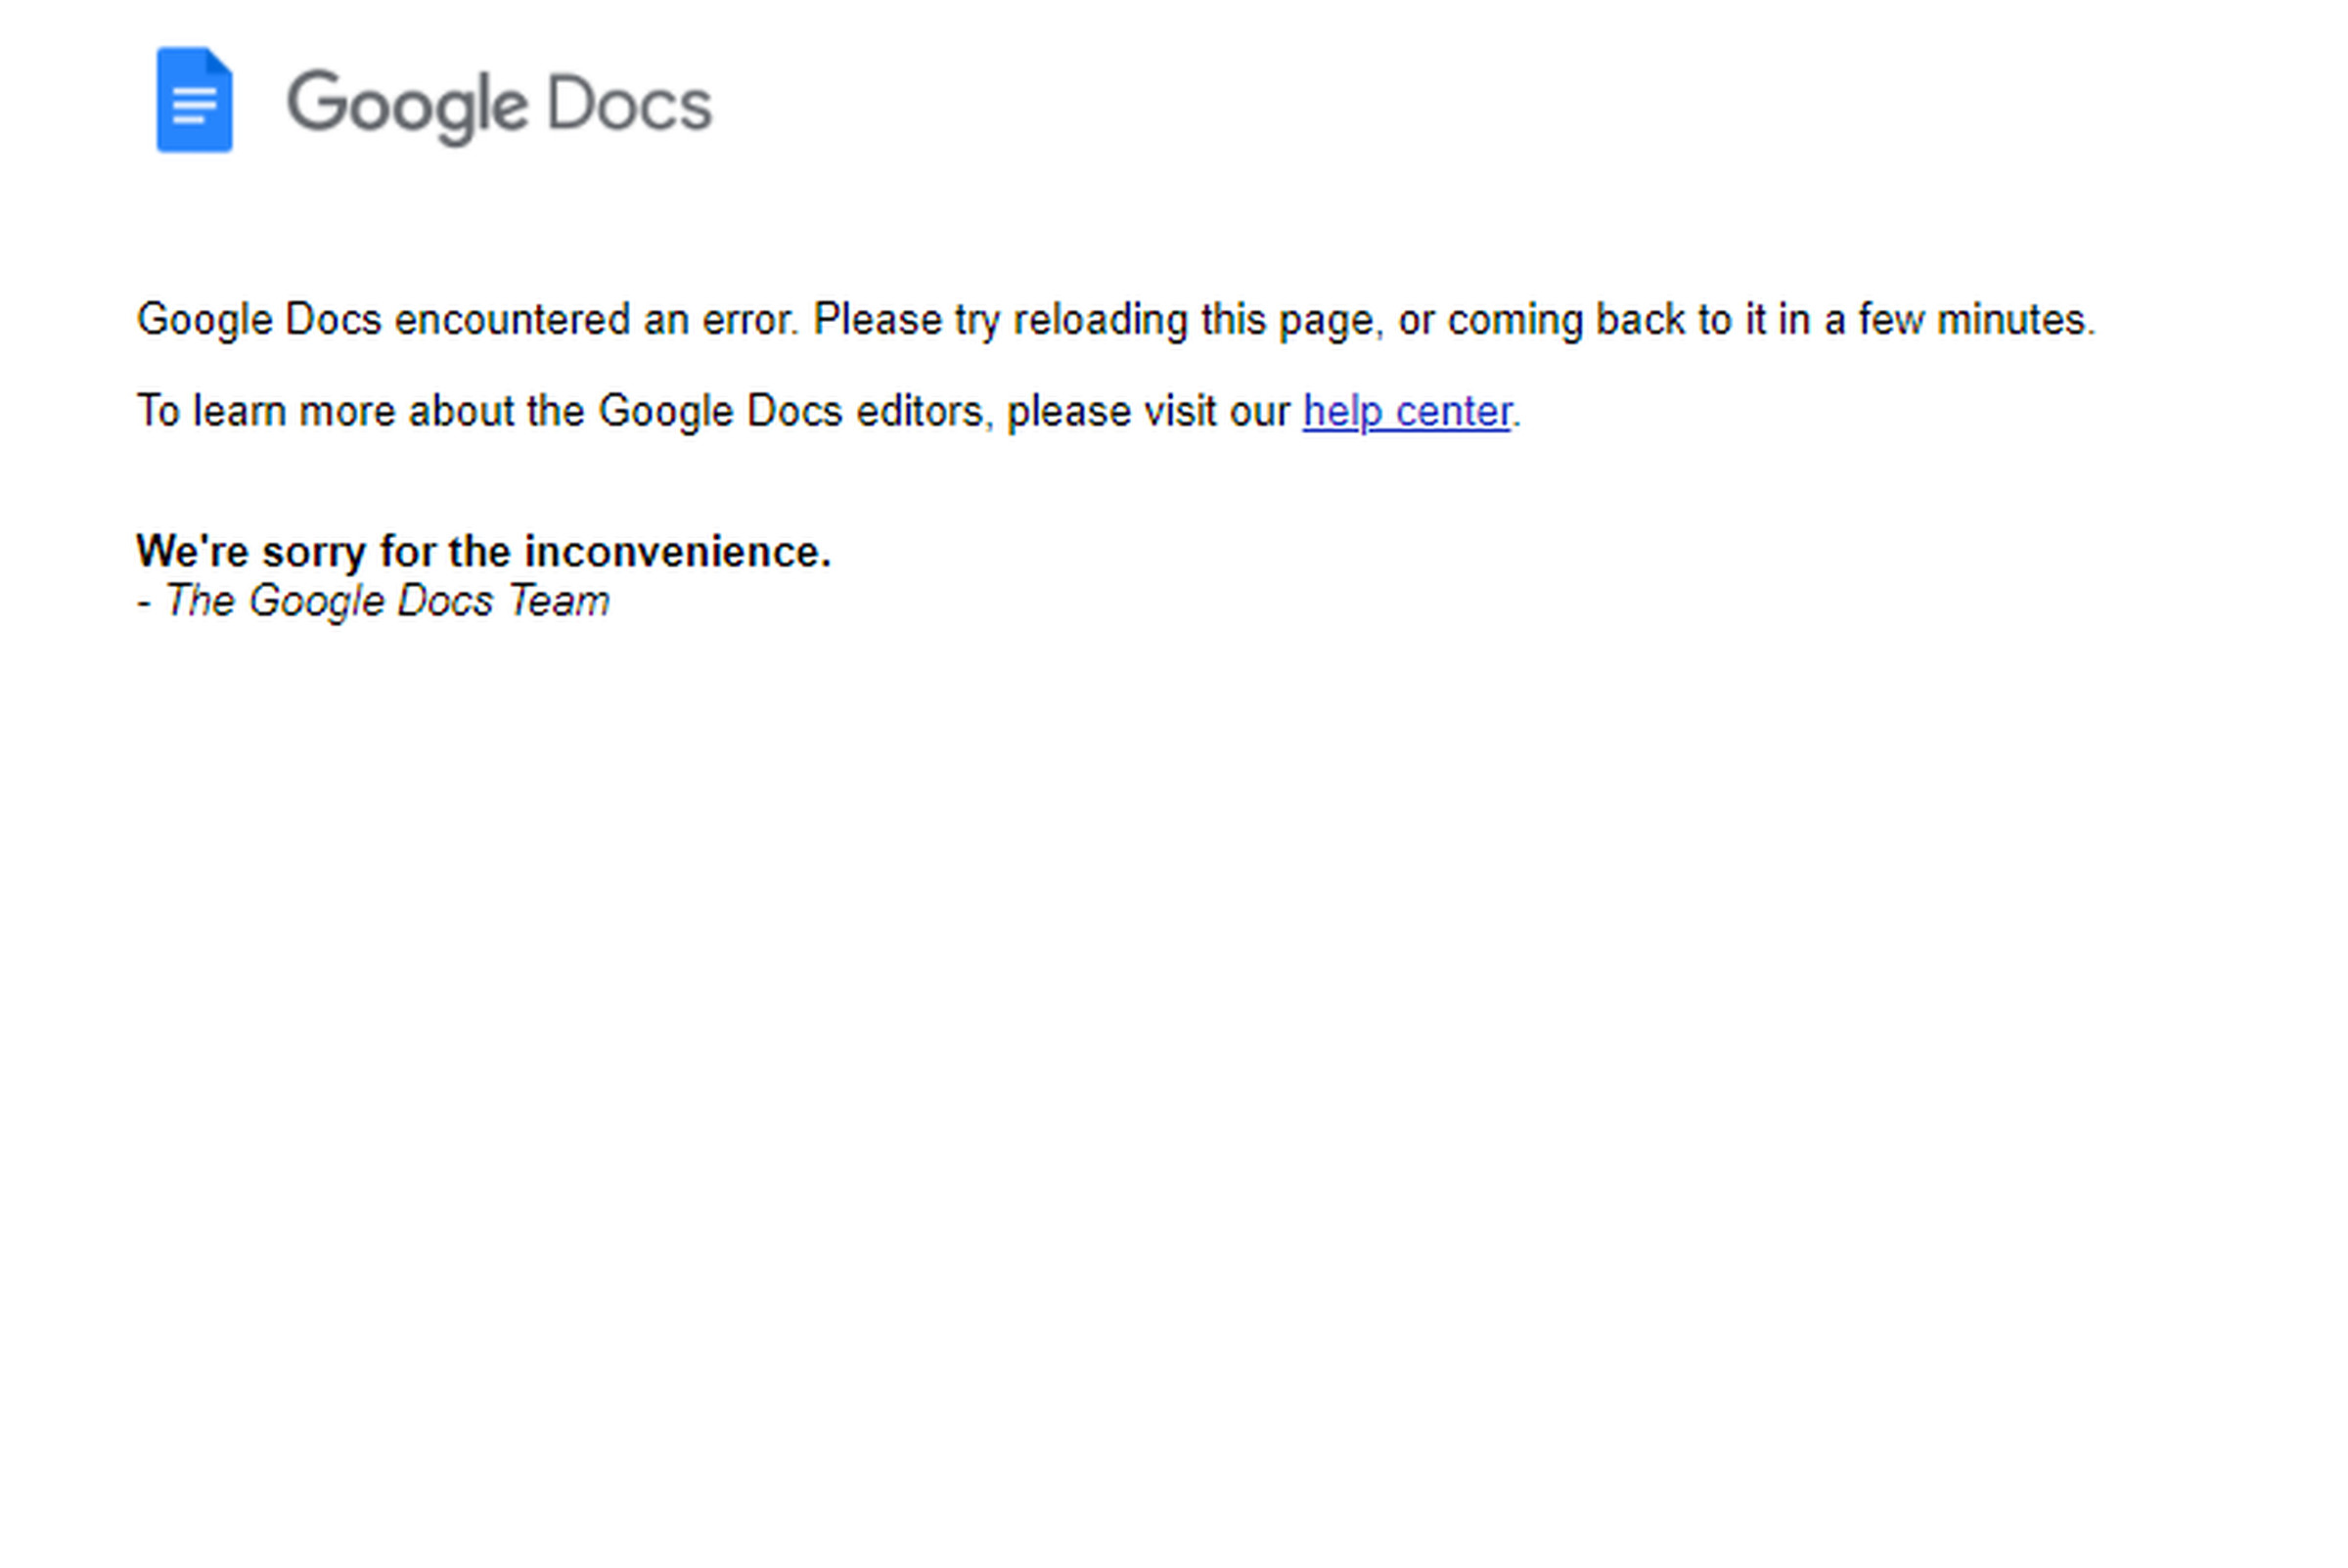 An error message appeared in Google Docs when users tried to create a new document.